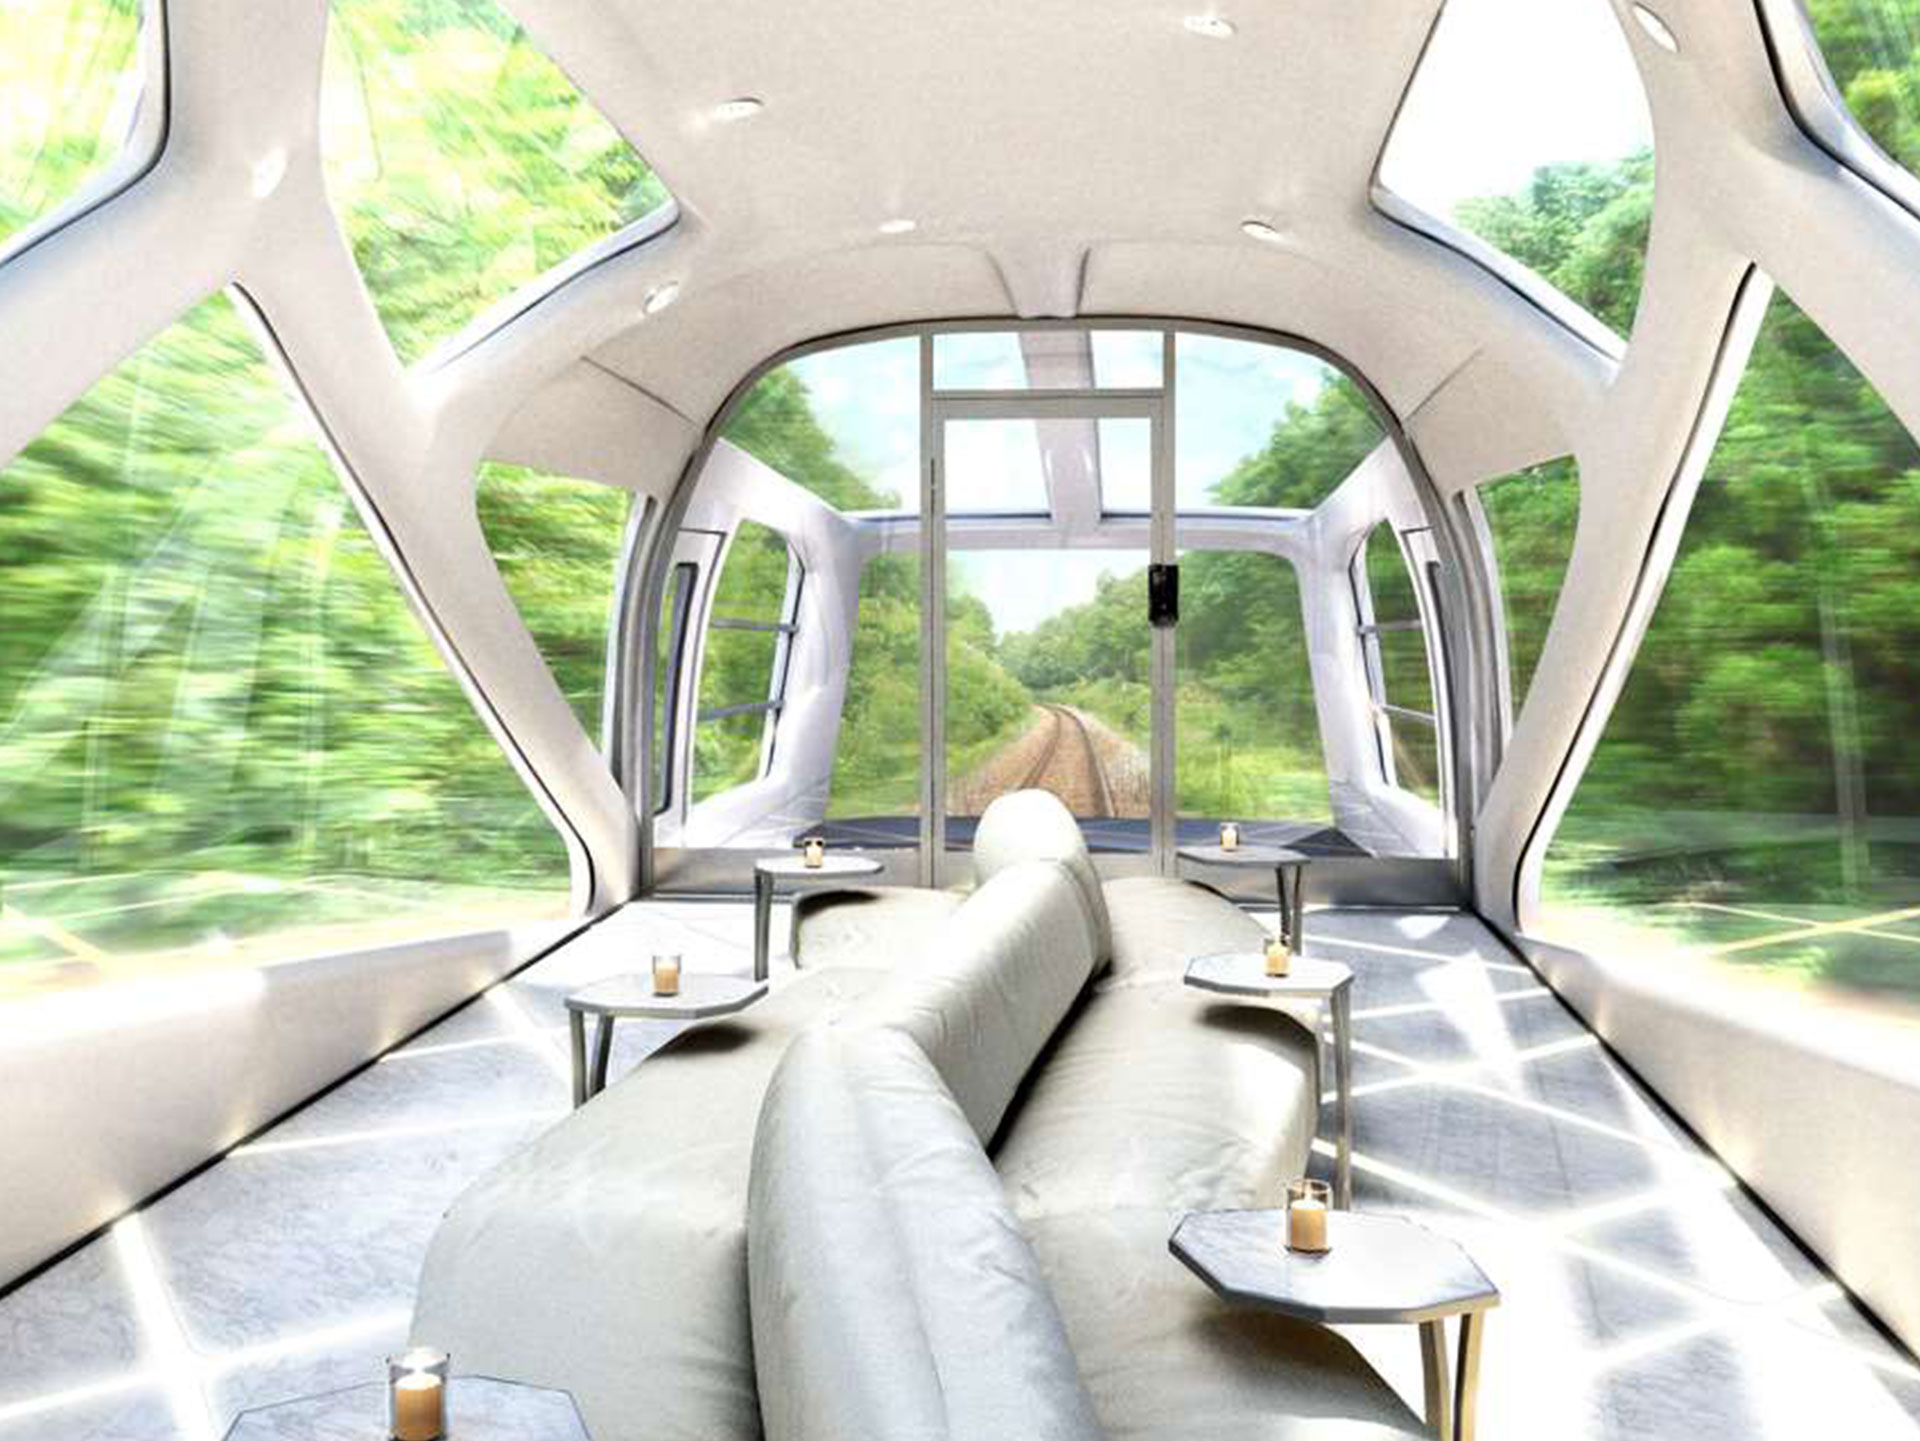 Japan has unveiled the most luxurious train ever